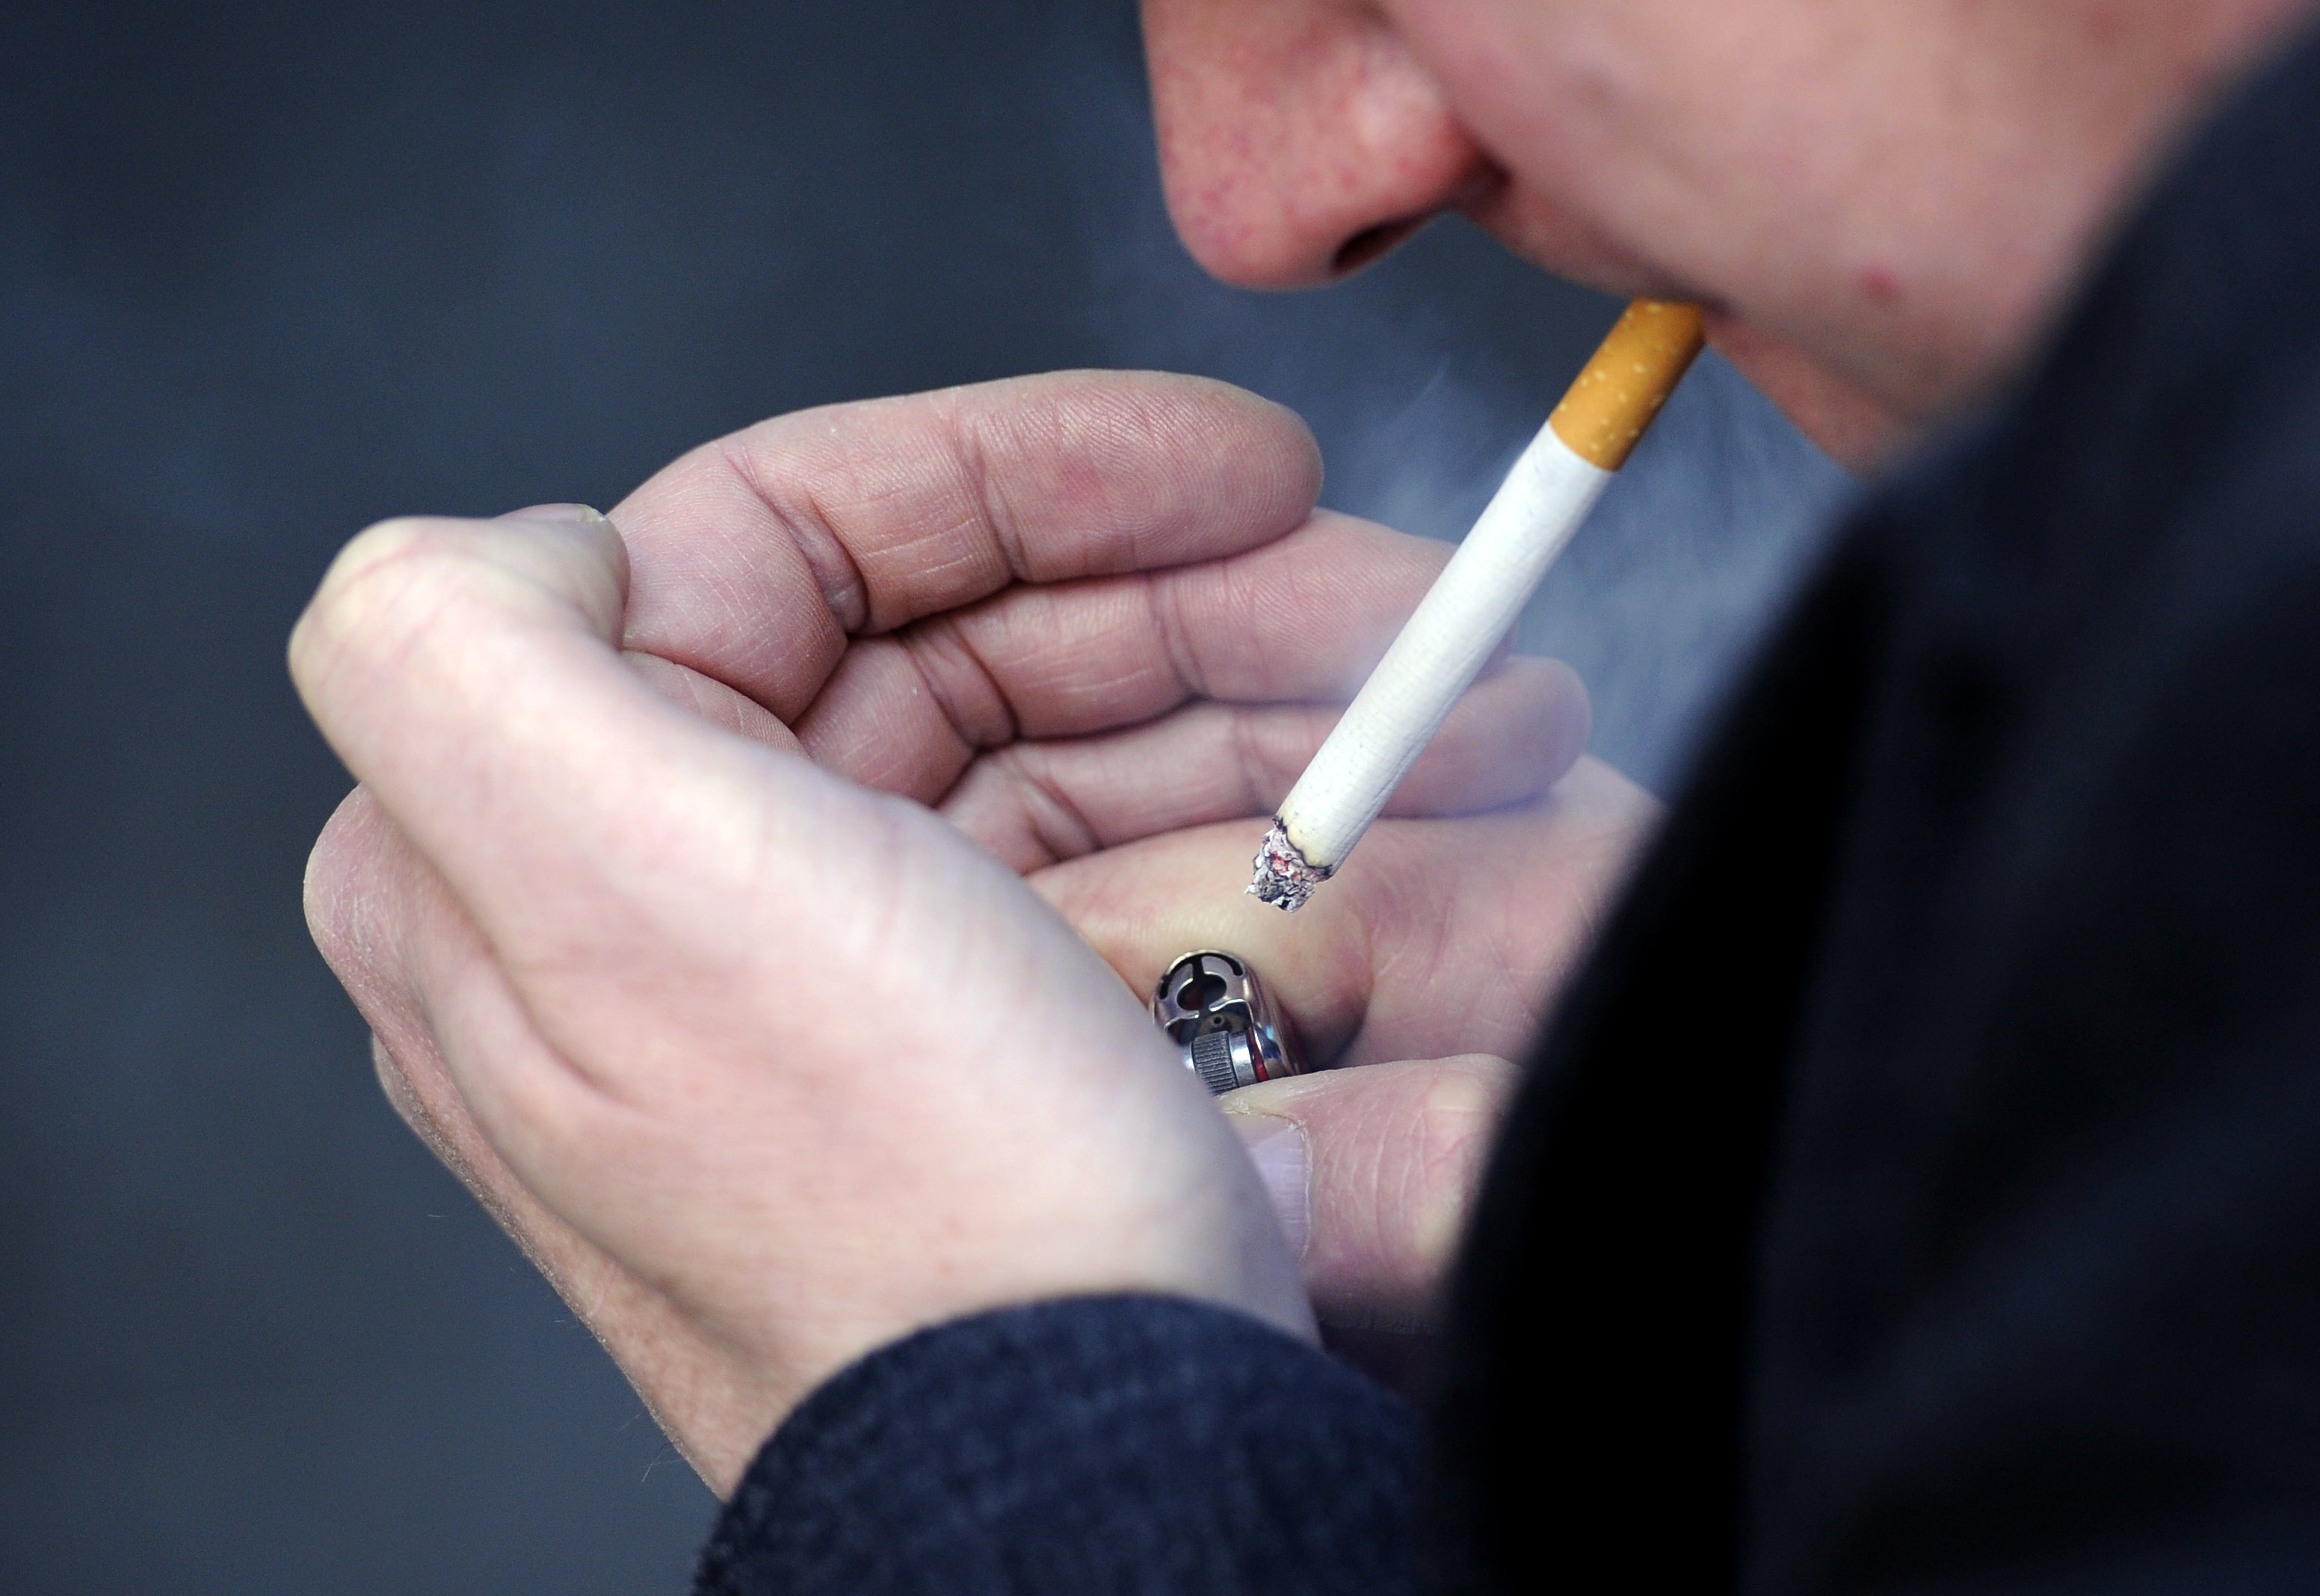 Biden Administration is expected to reduce nicotine levels in cigarettes